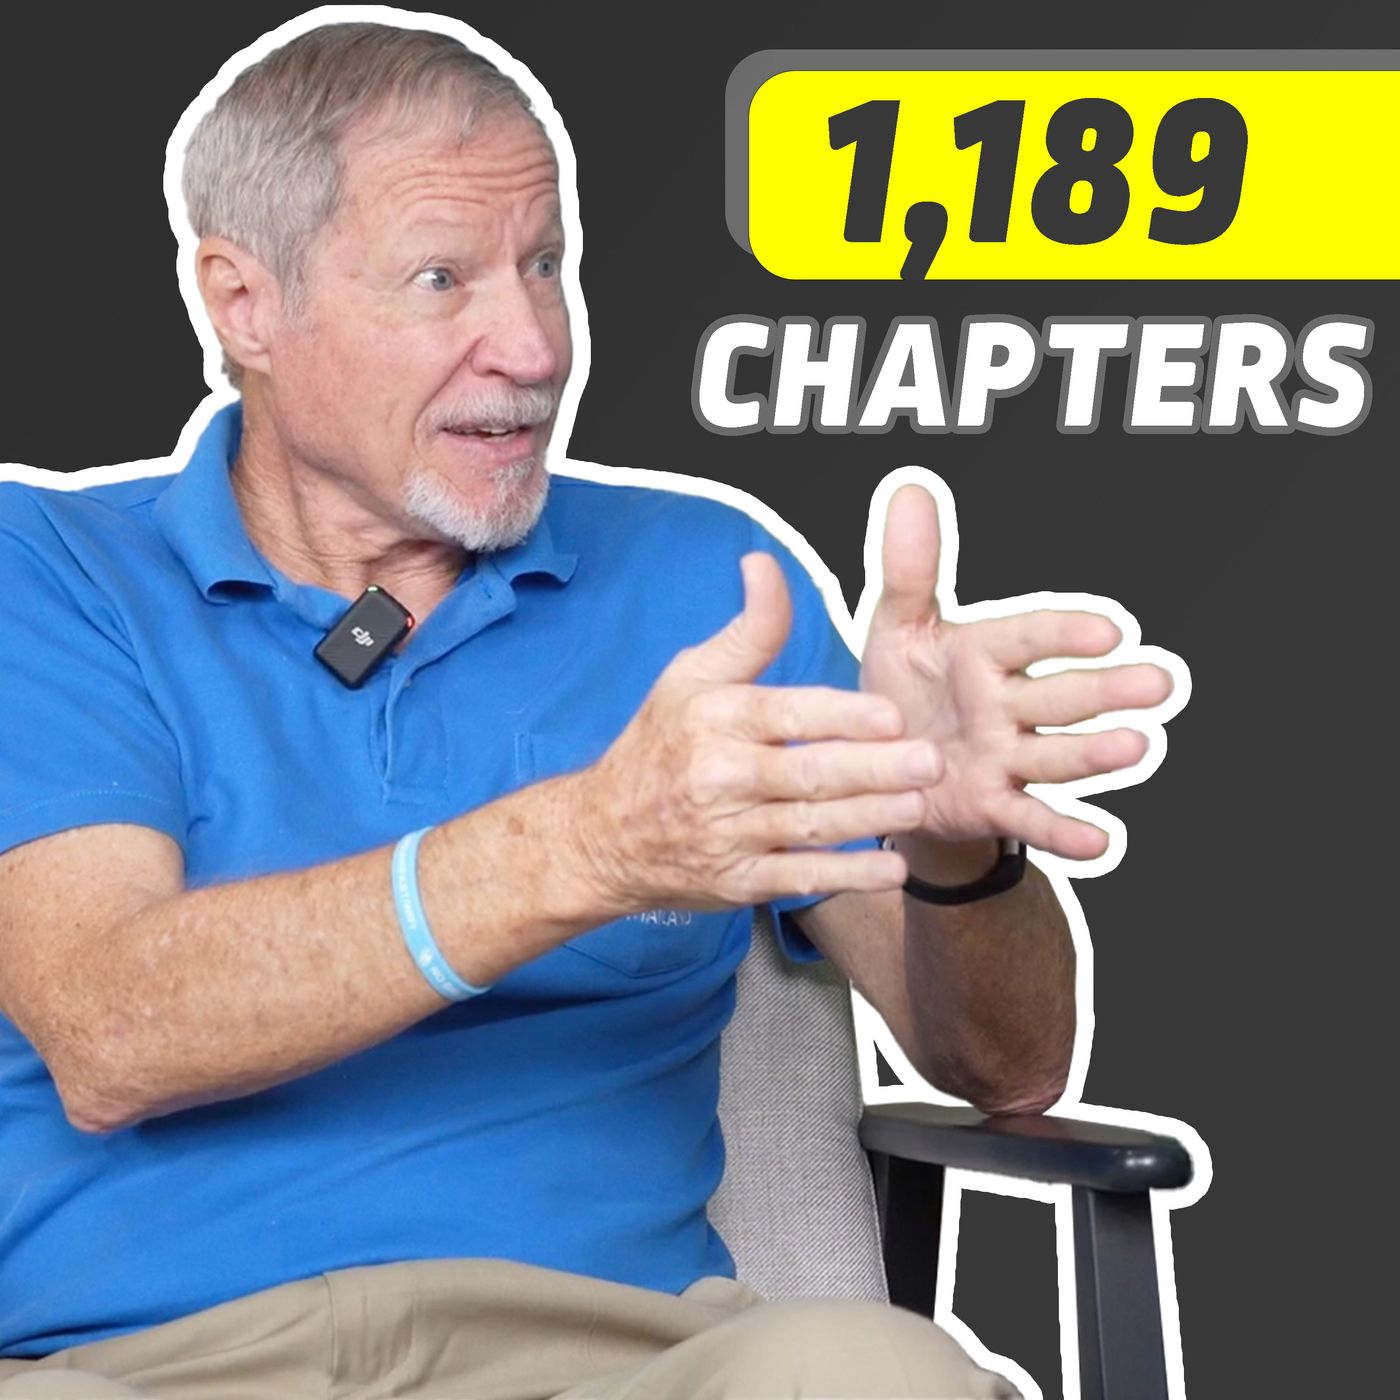 He Memorized All 1,189 Chapters of the Bible (kind of...)